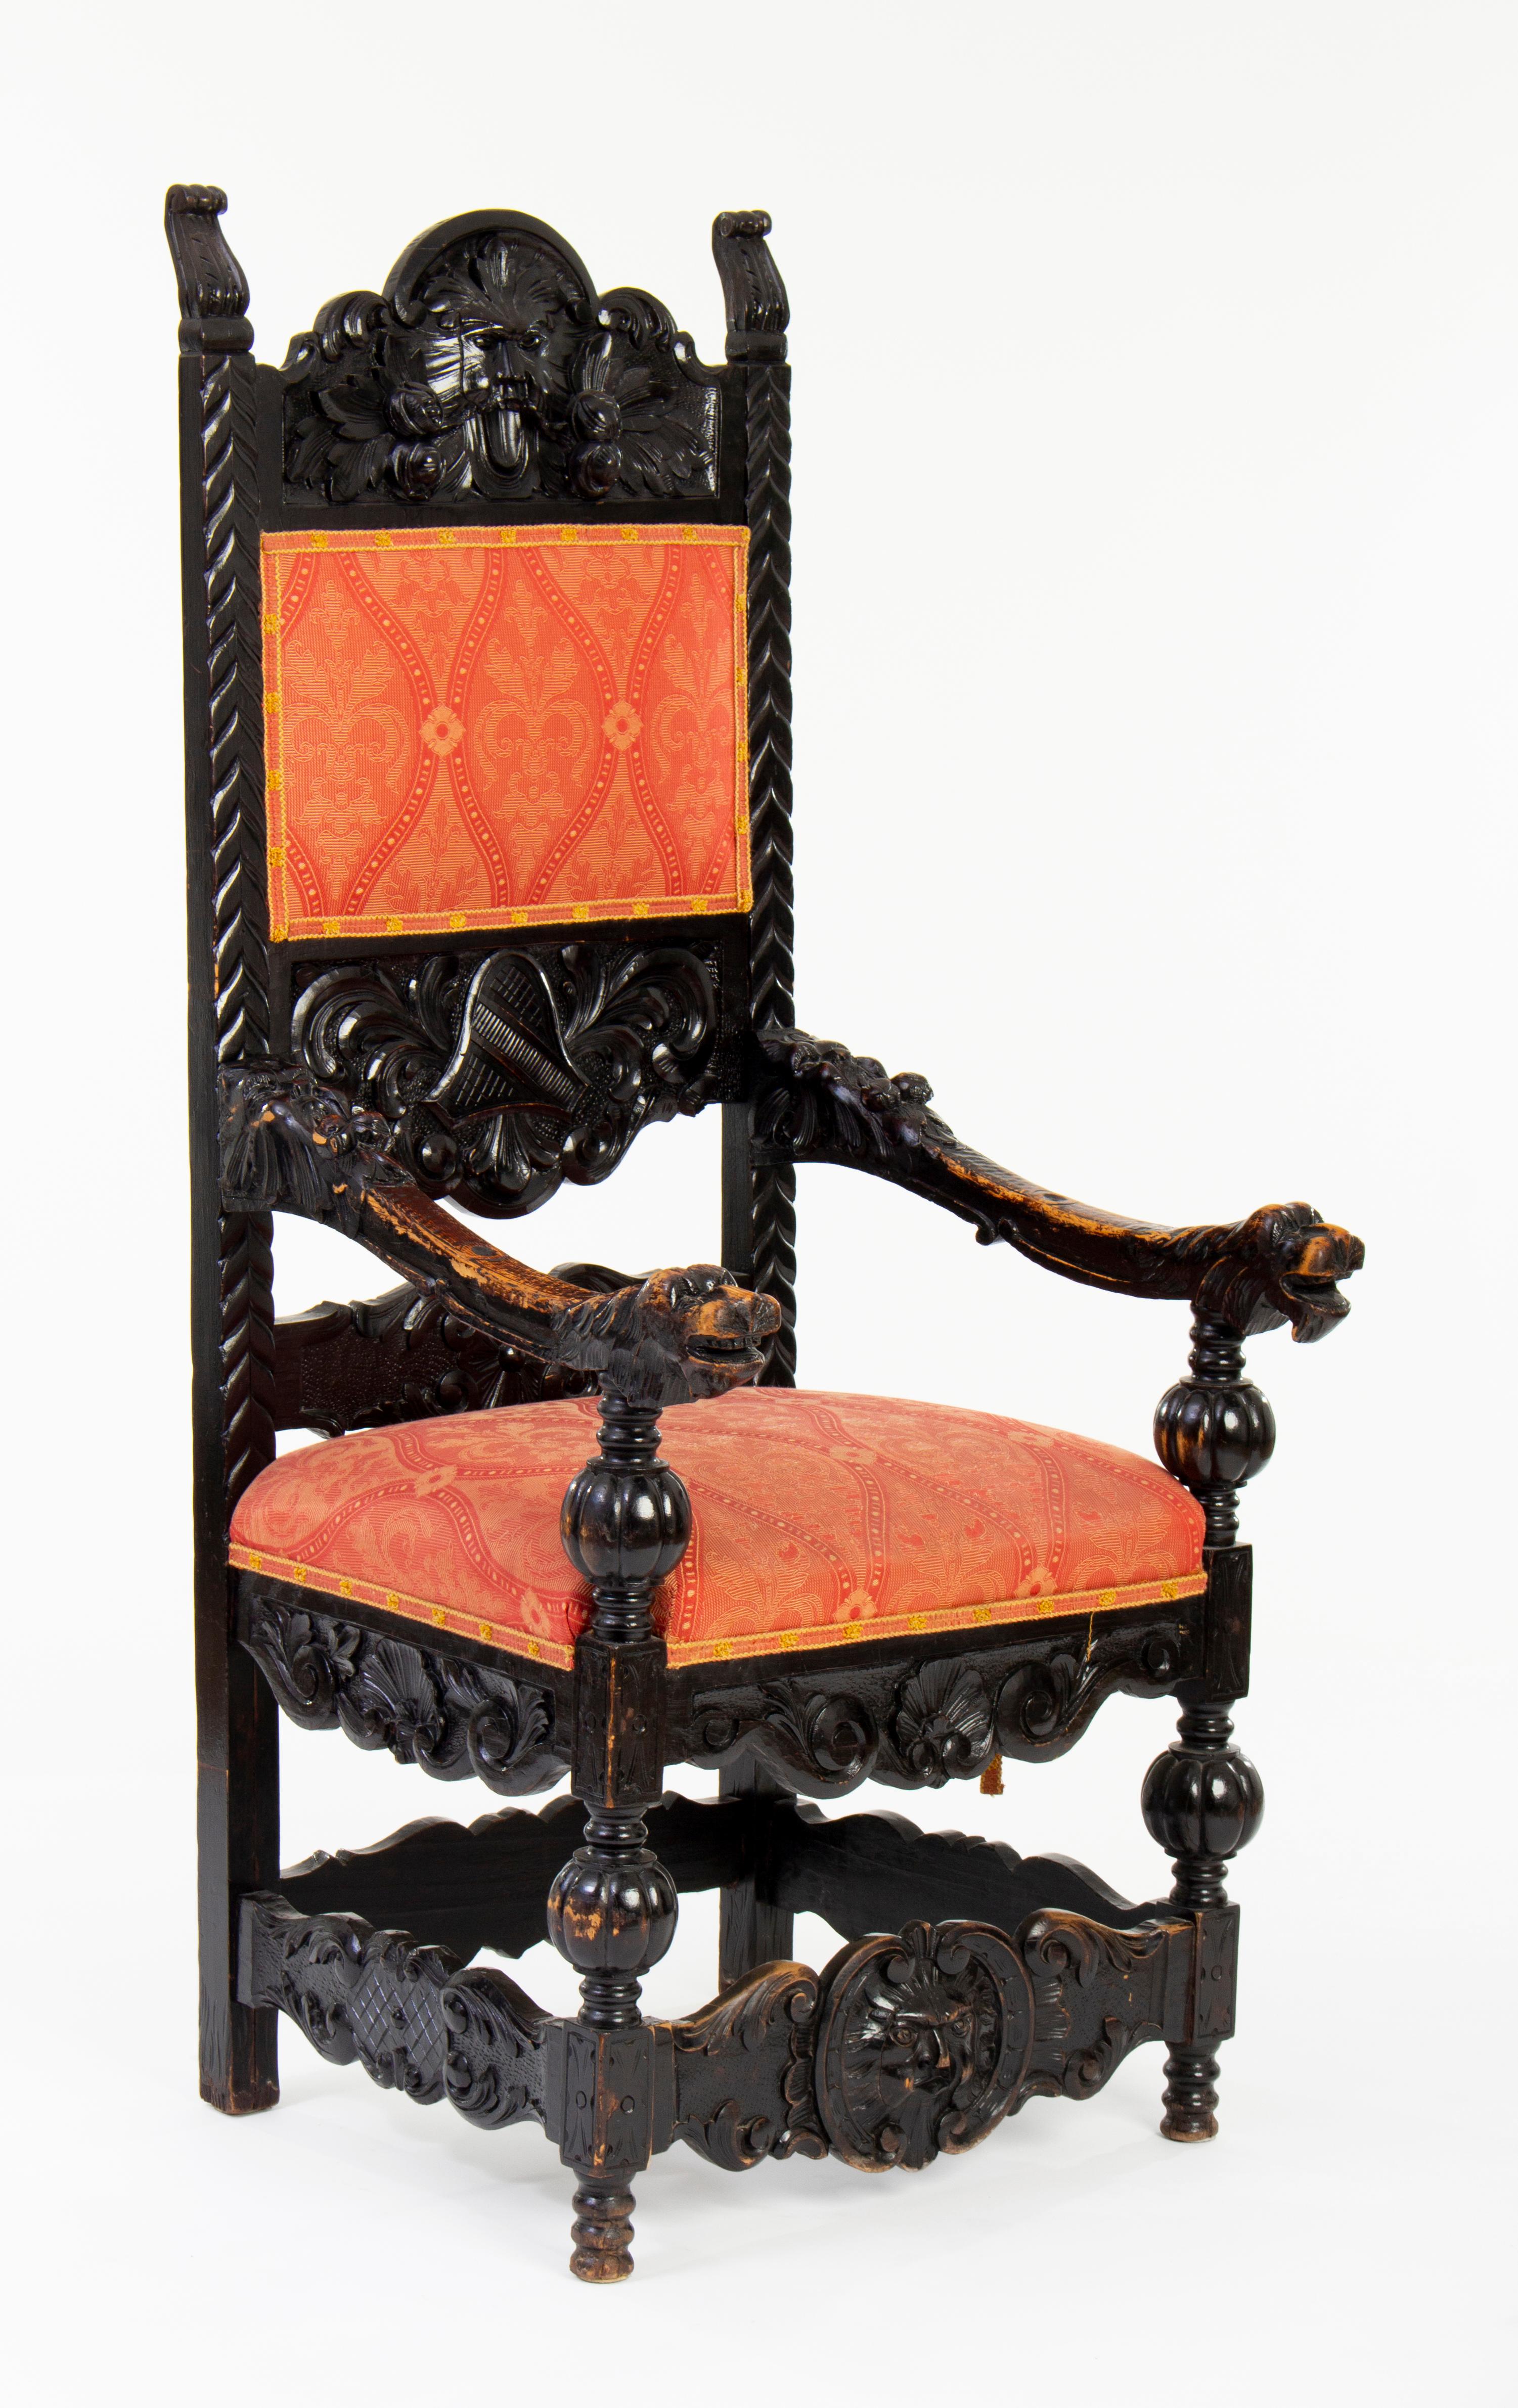 Other Antique Carved Basswood Throne Chairs in Historicist Style, ca. 1900 For Sale